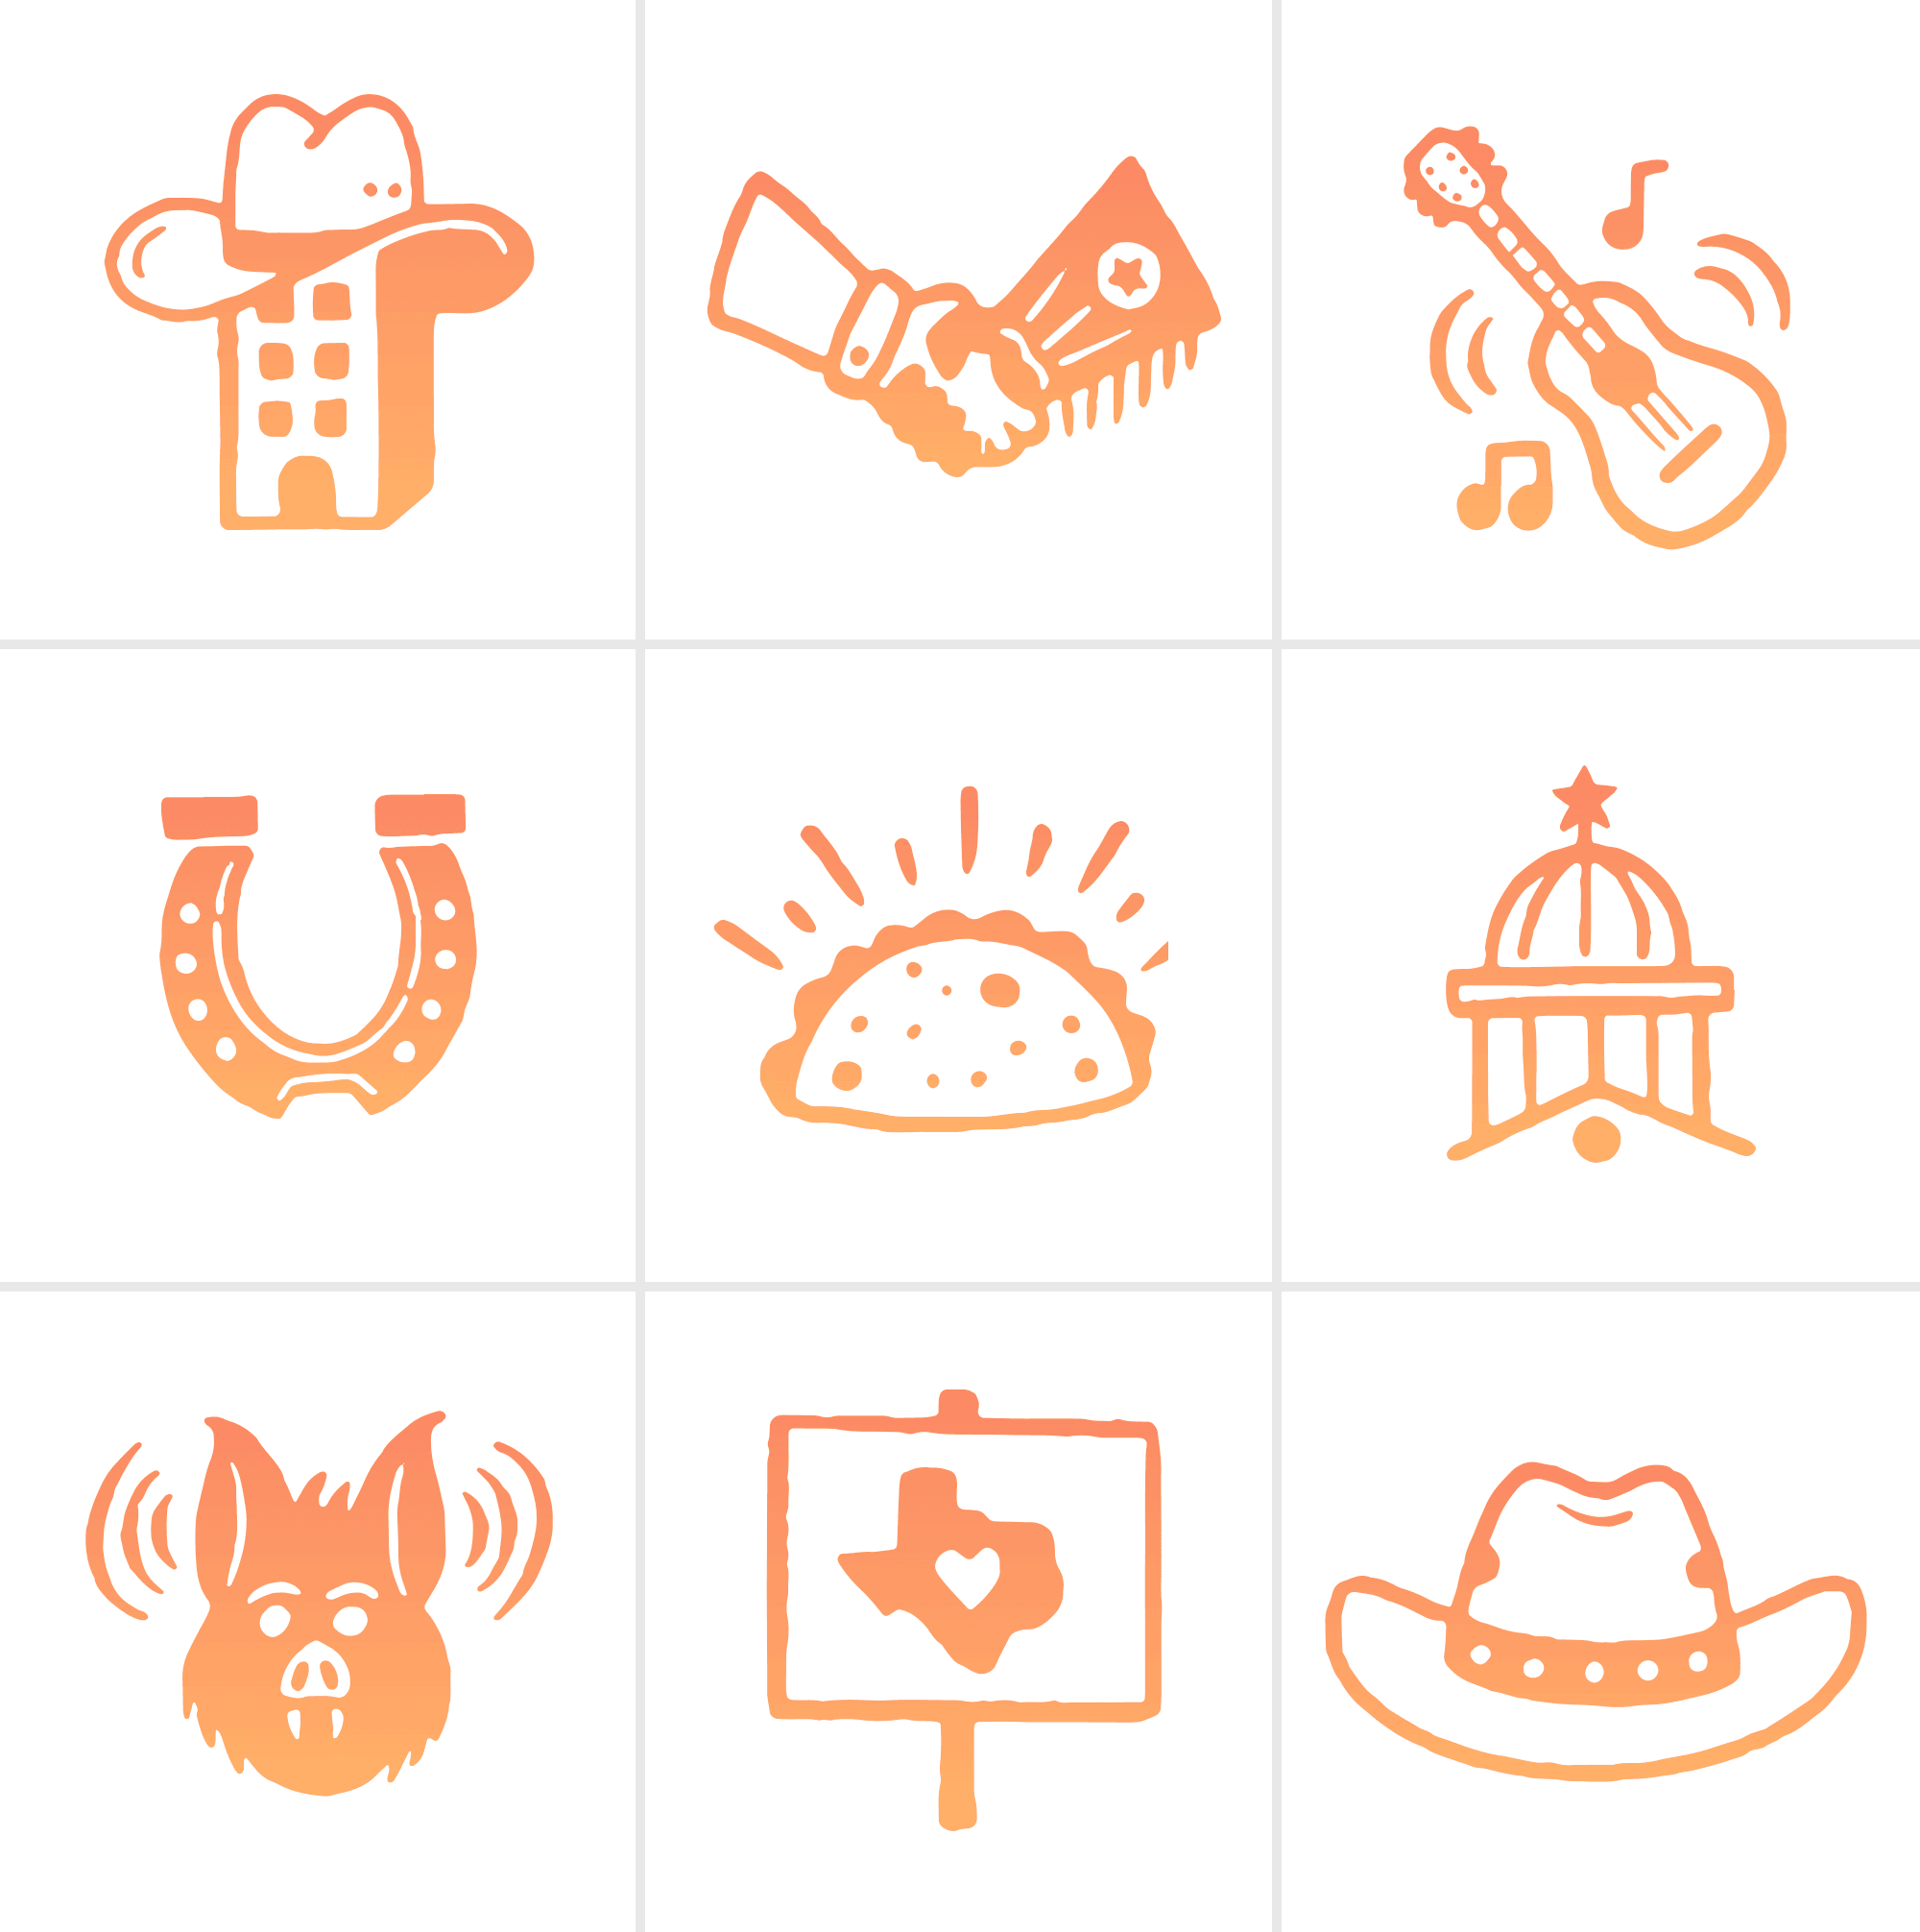 Austin Chamber of Commerce icon set by Bryan Butler